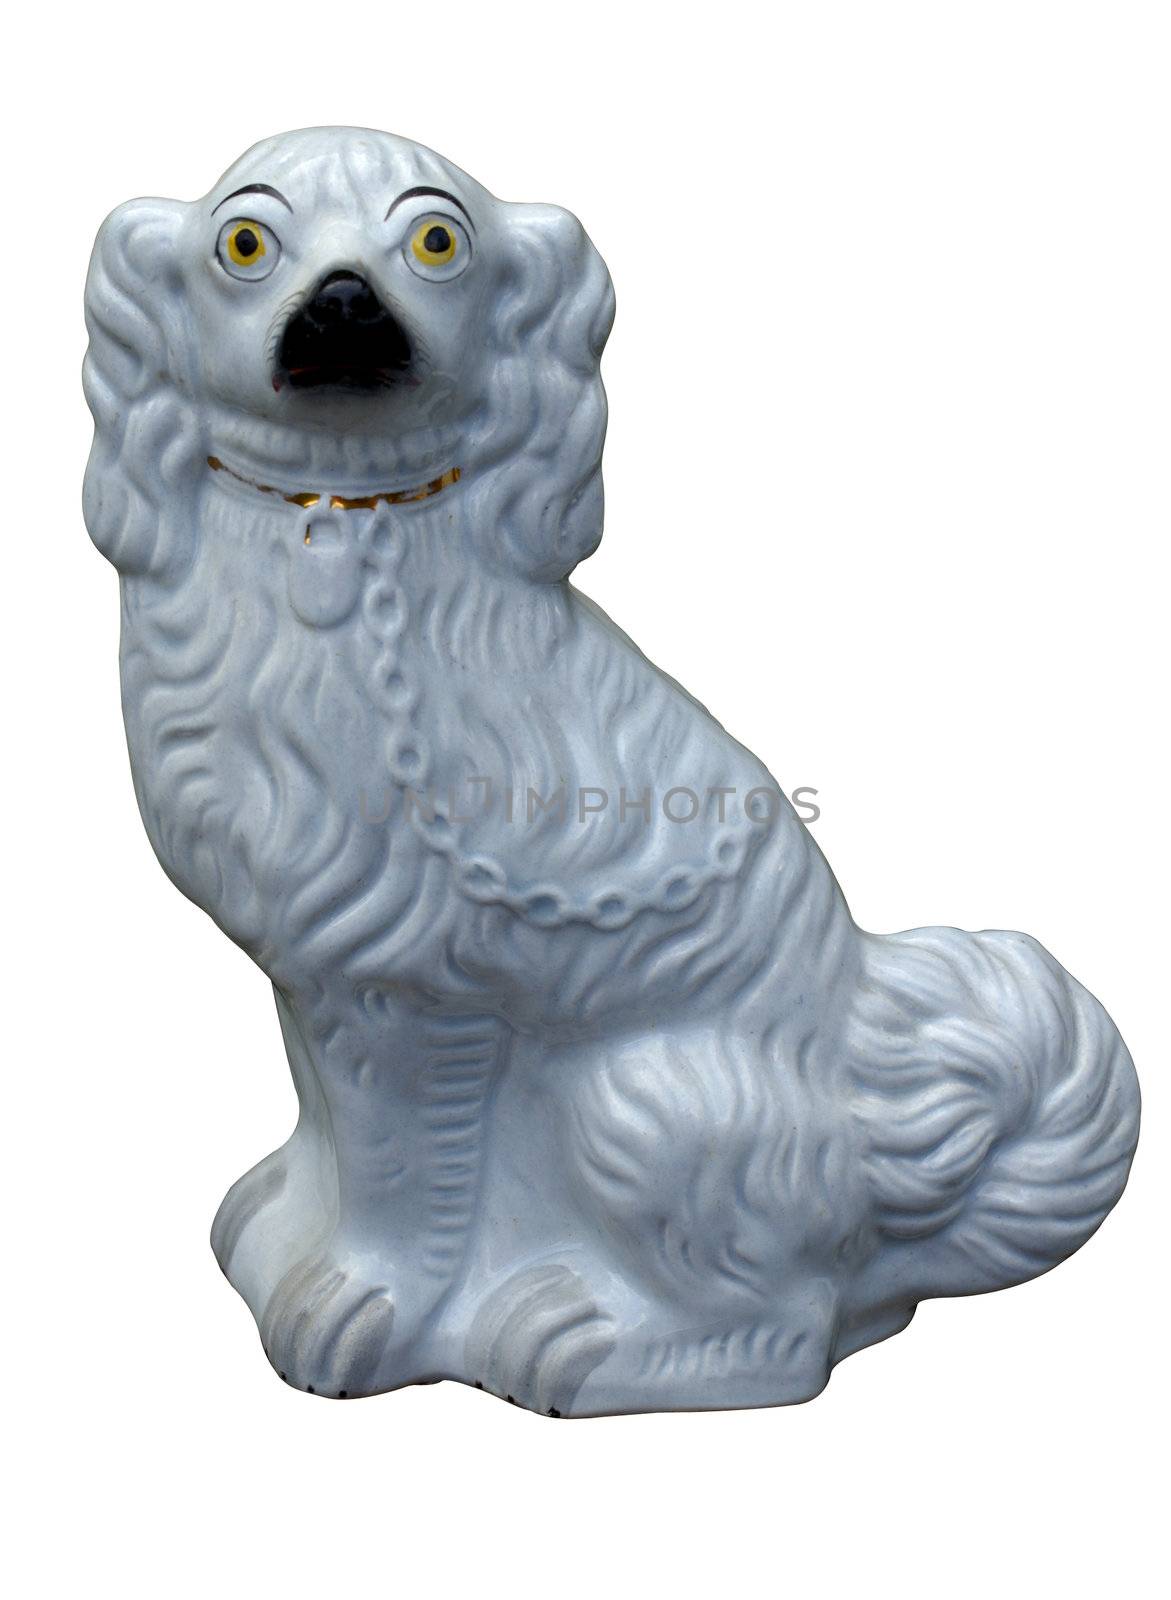 Staffordshire pottery dog (with clipping path) by Bateleur